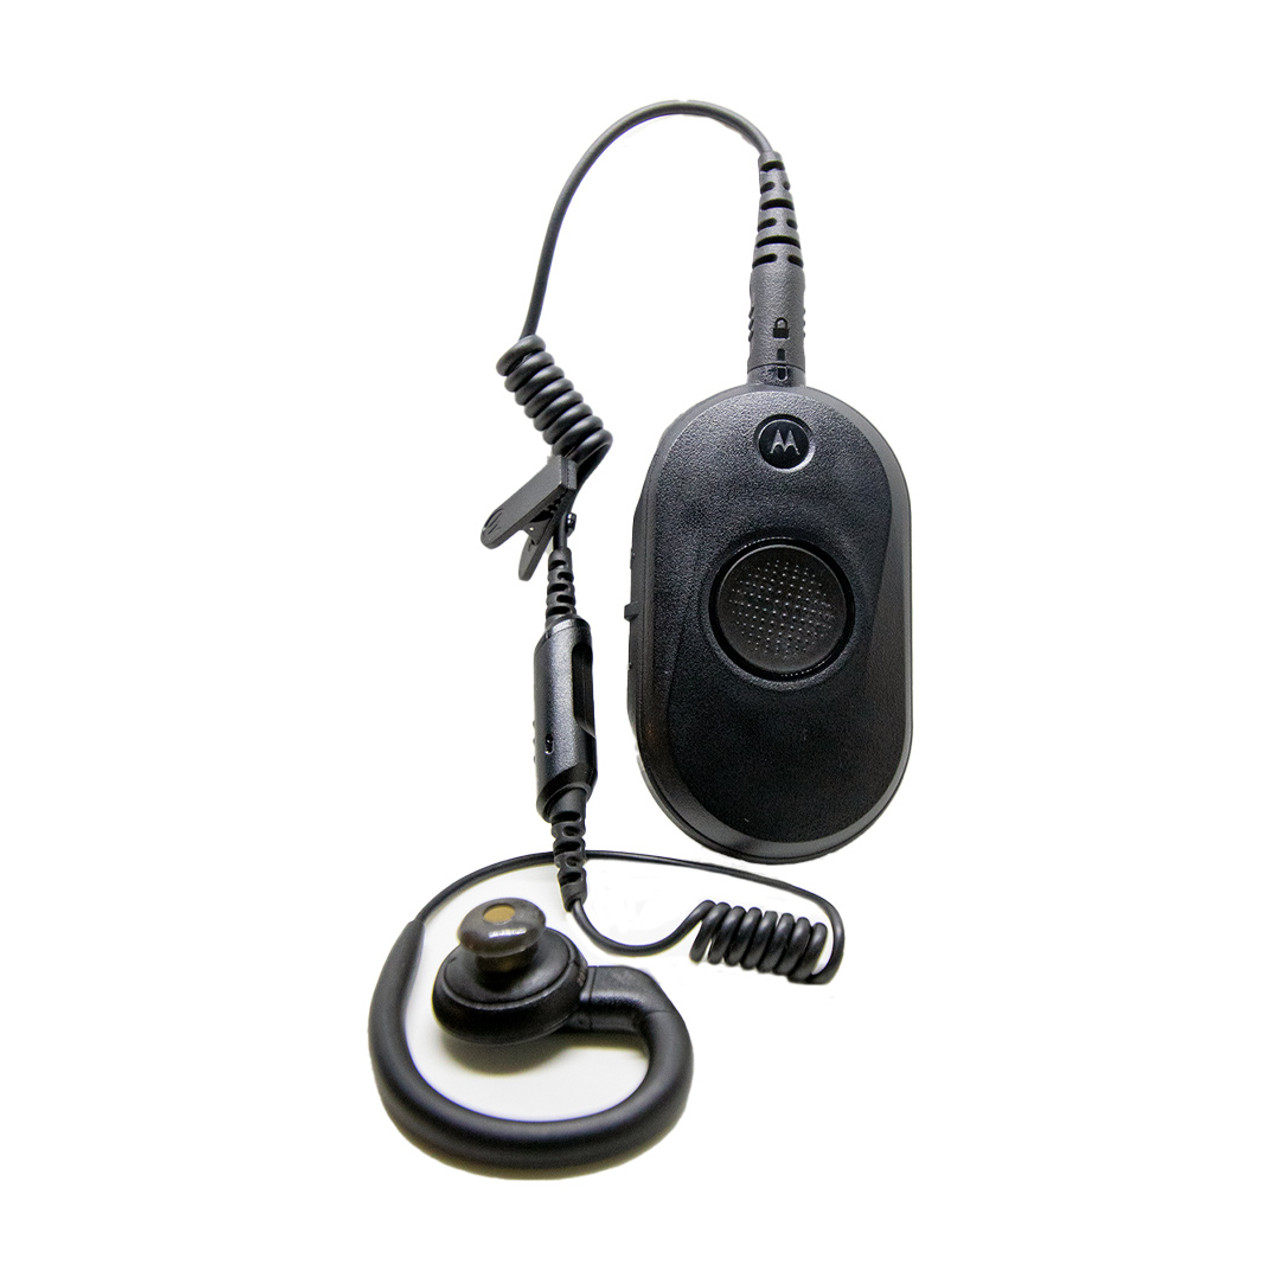 Motorola CLP1010e Two Way Radio with Free Headset For Restaurants, Retail,  or Medical Businesses